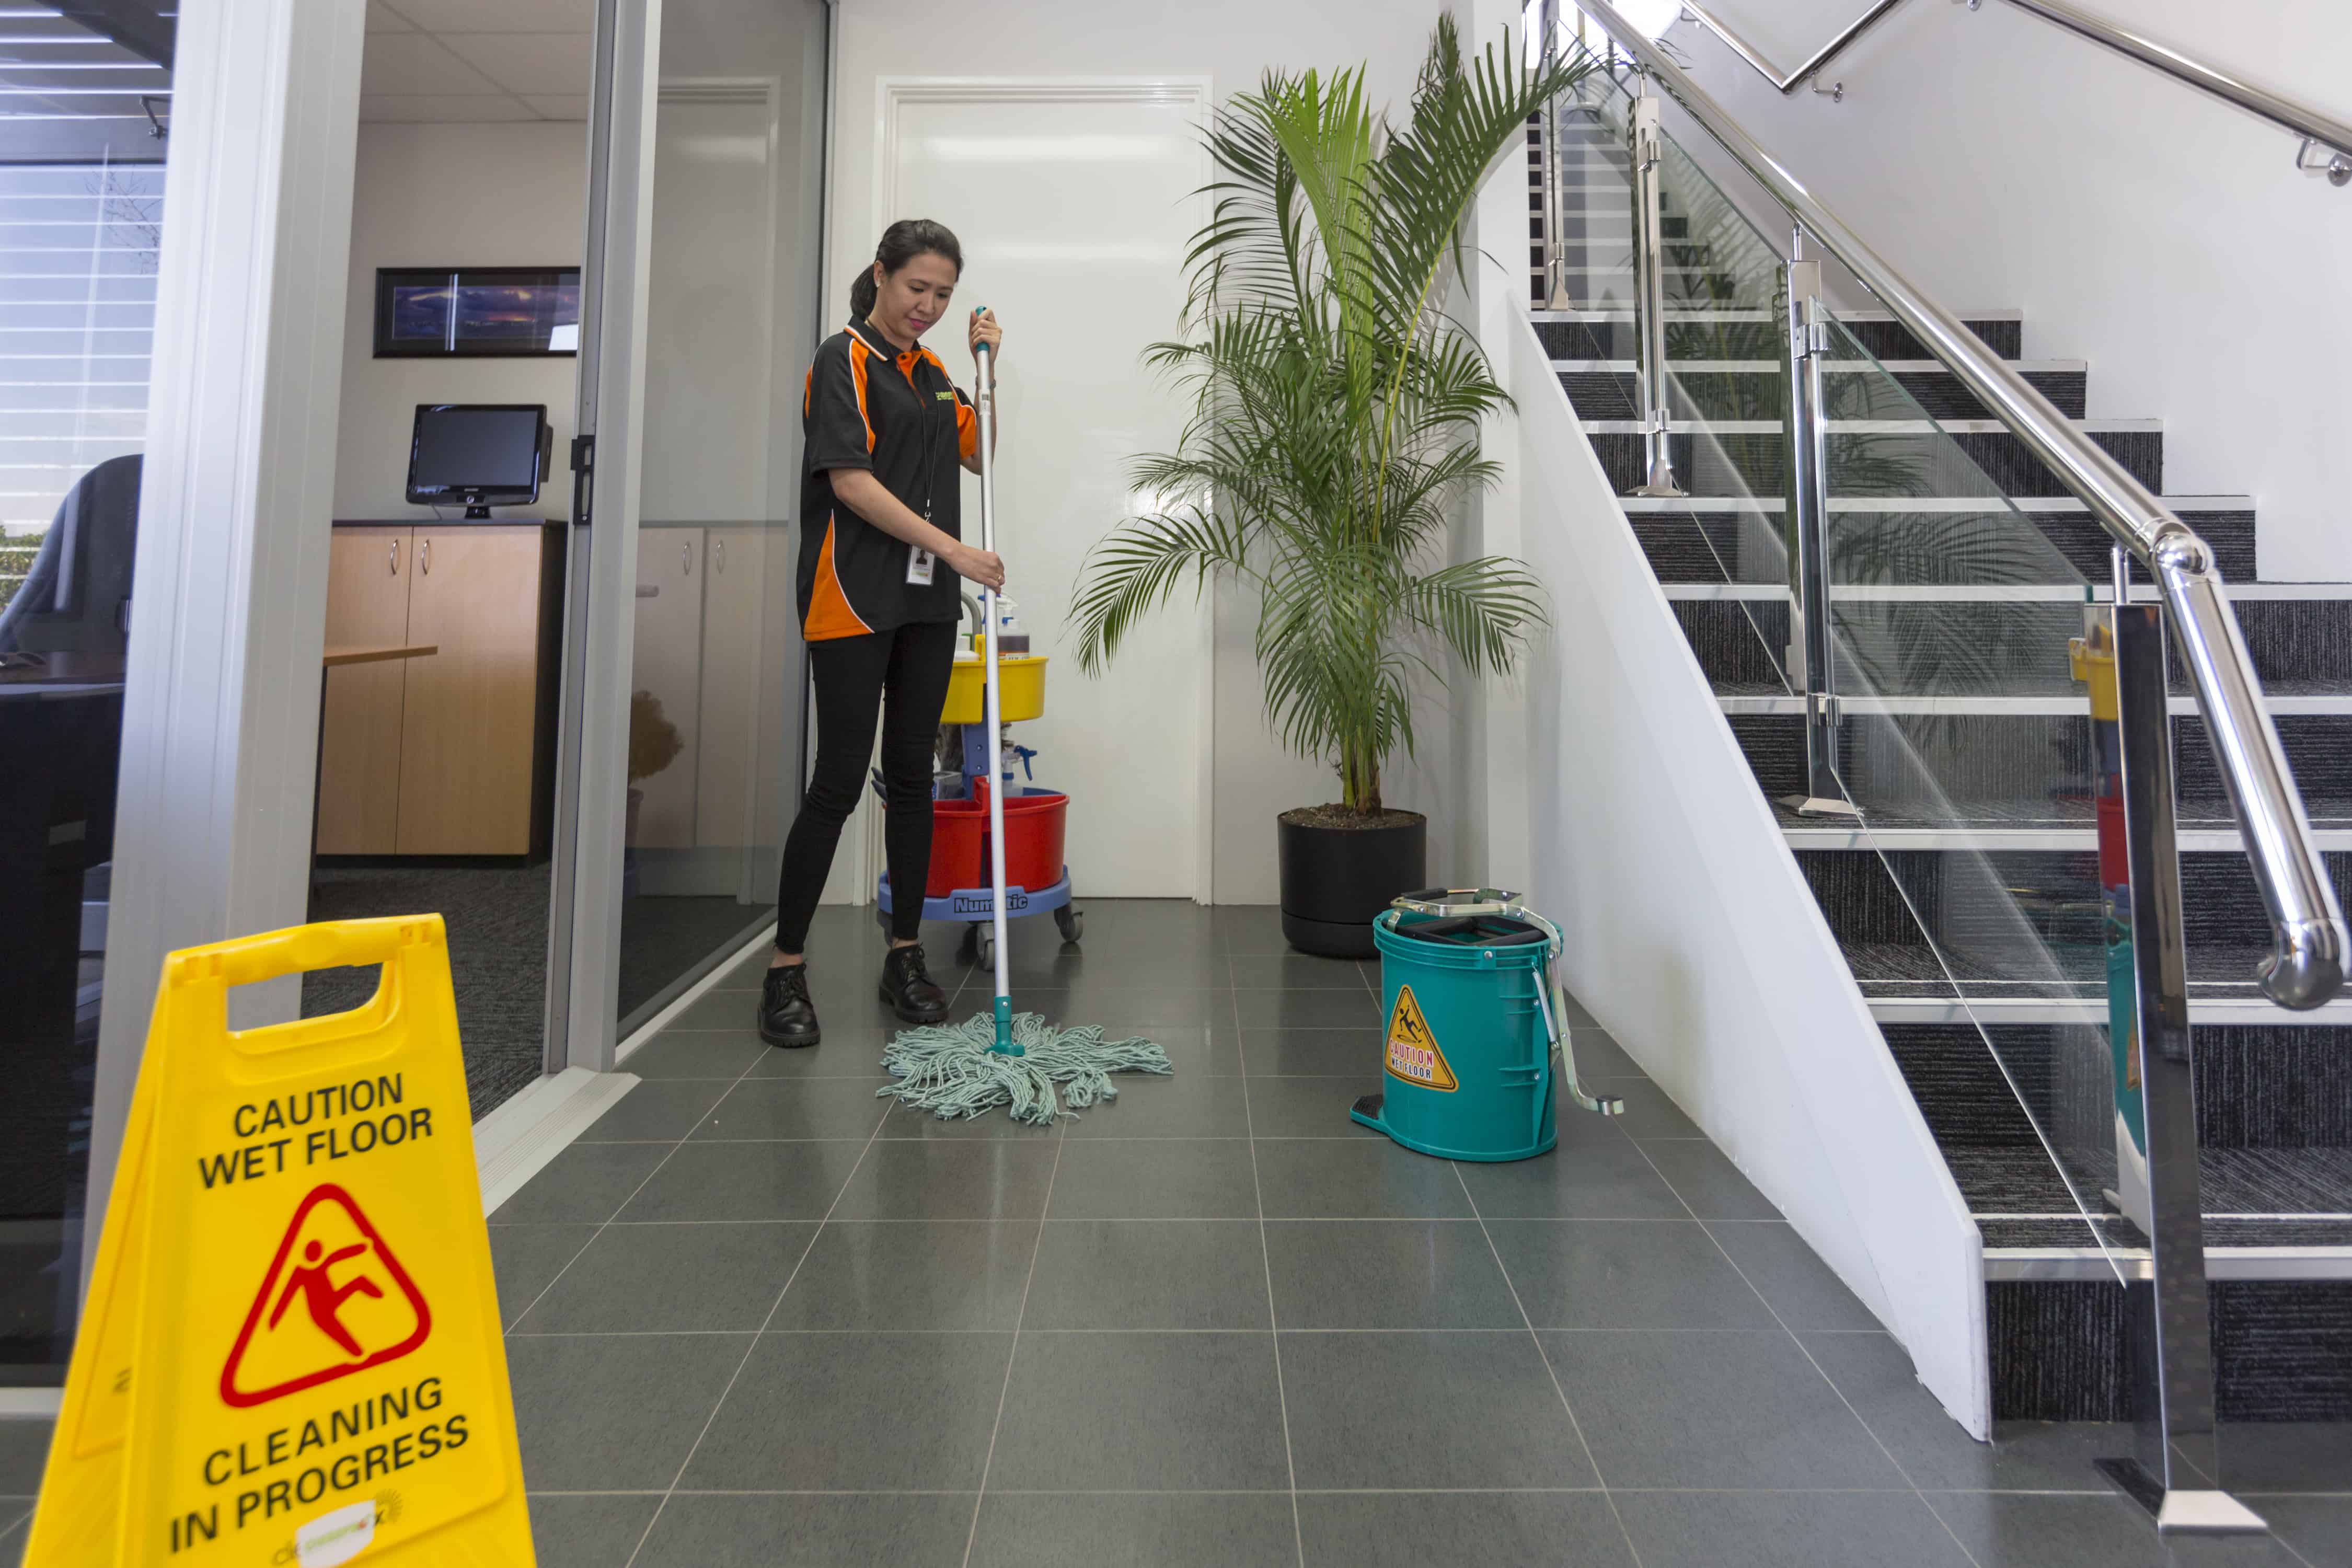 How Can Your Company Benefit from Industrial Cleaning? We’ve Got 5 Key Ideas